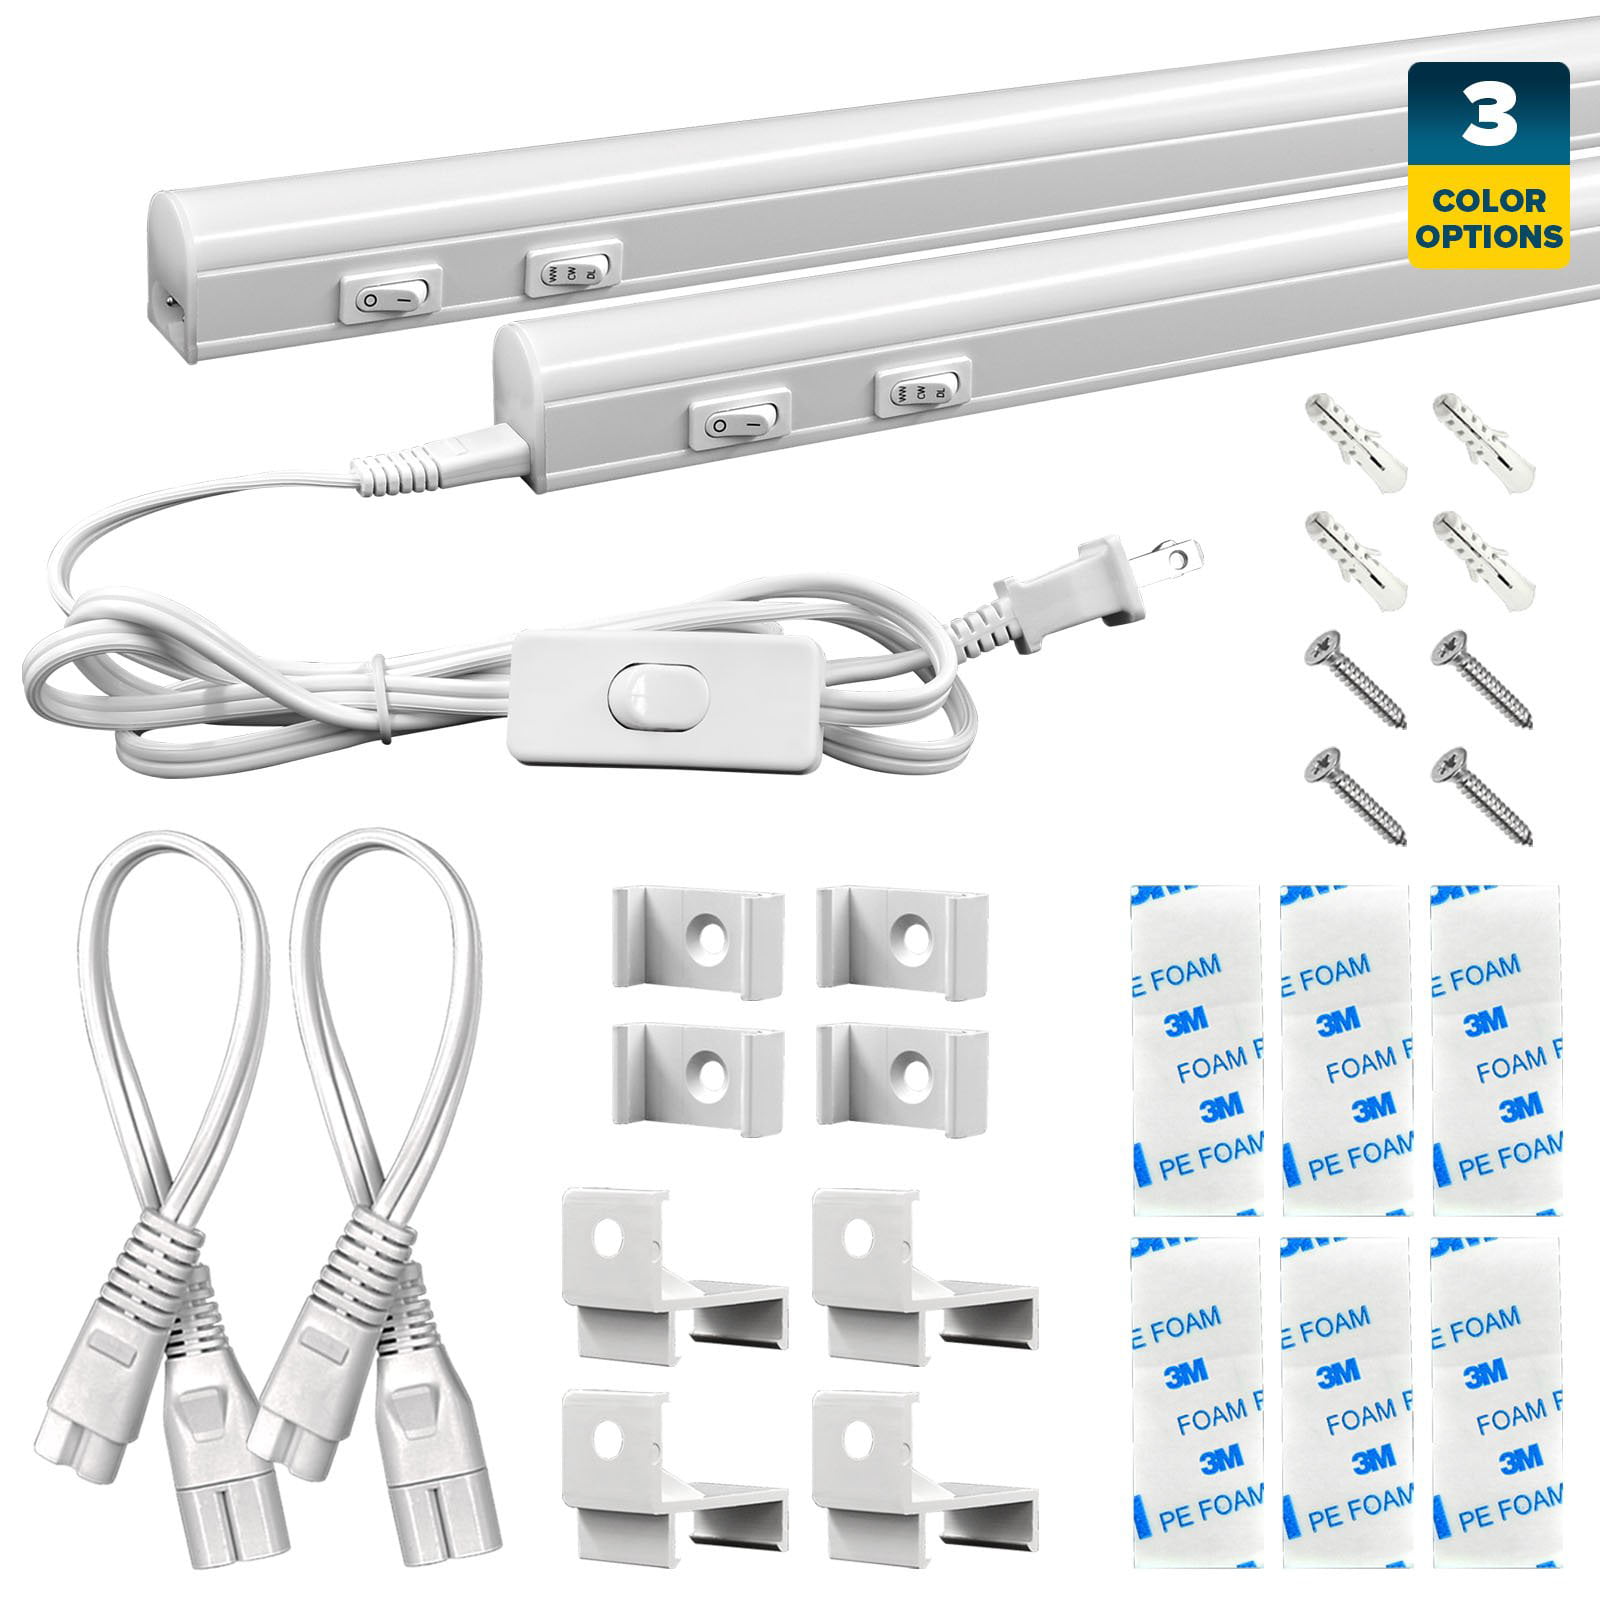 Sylvania PIPE LED under cabinet light 7W cool white 600mm length 